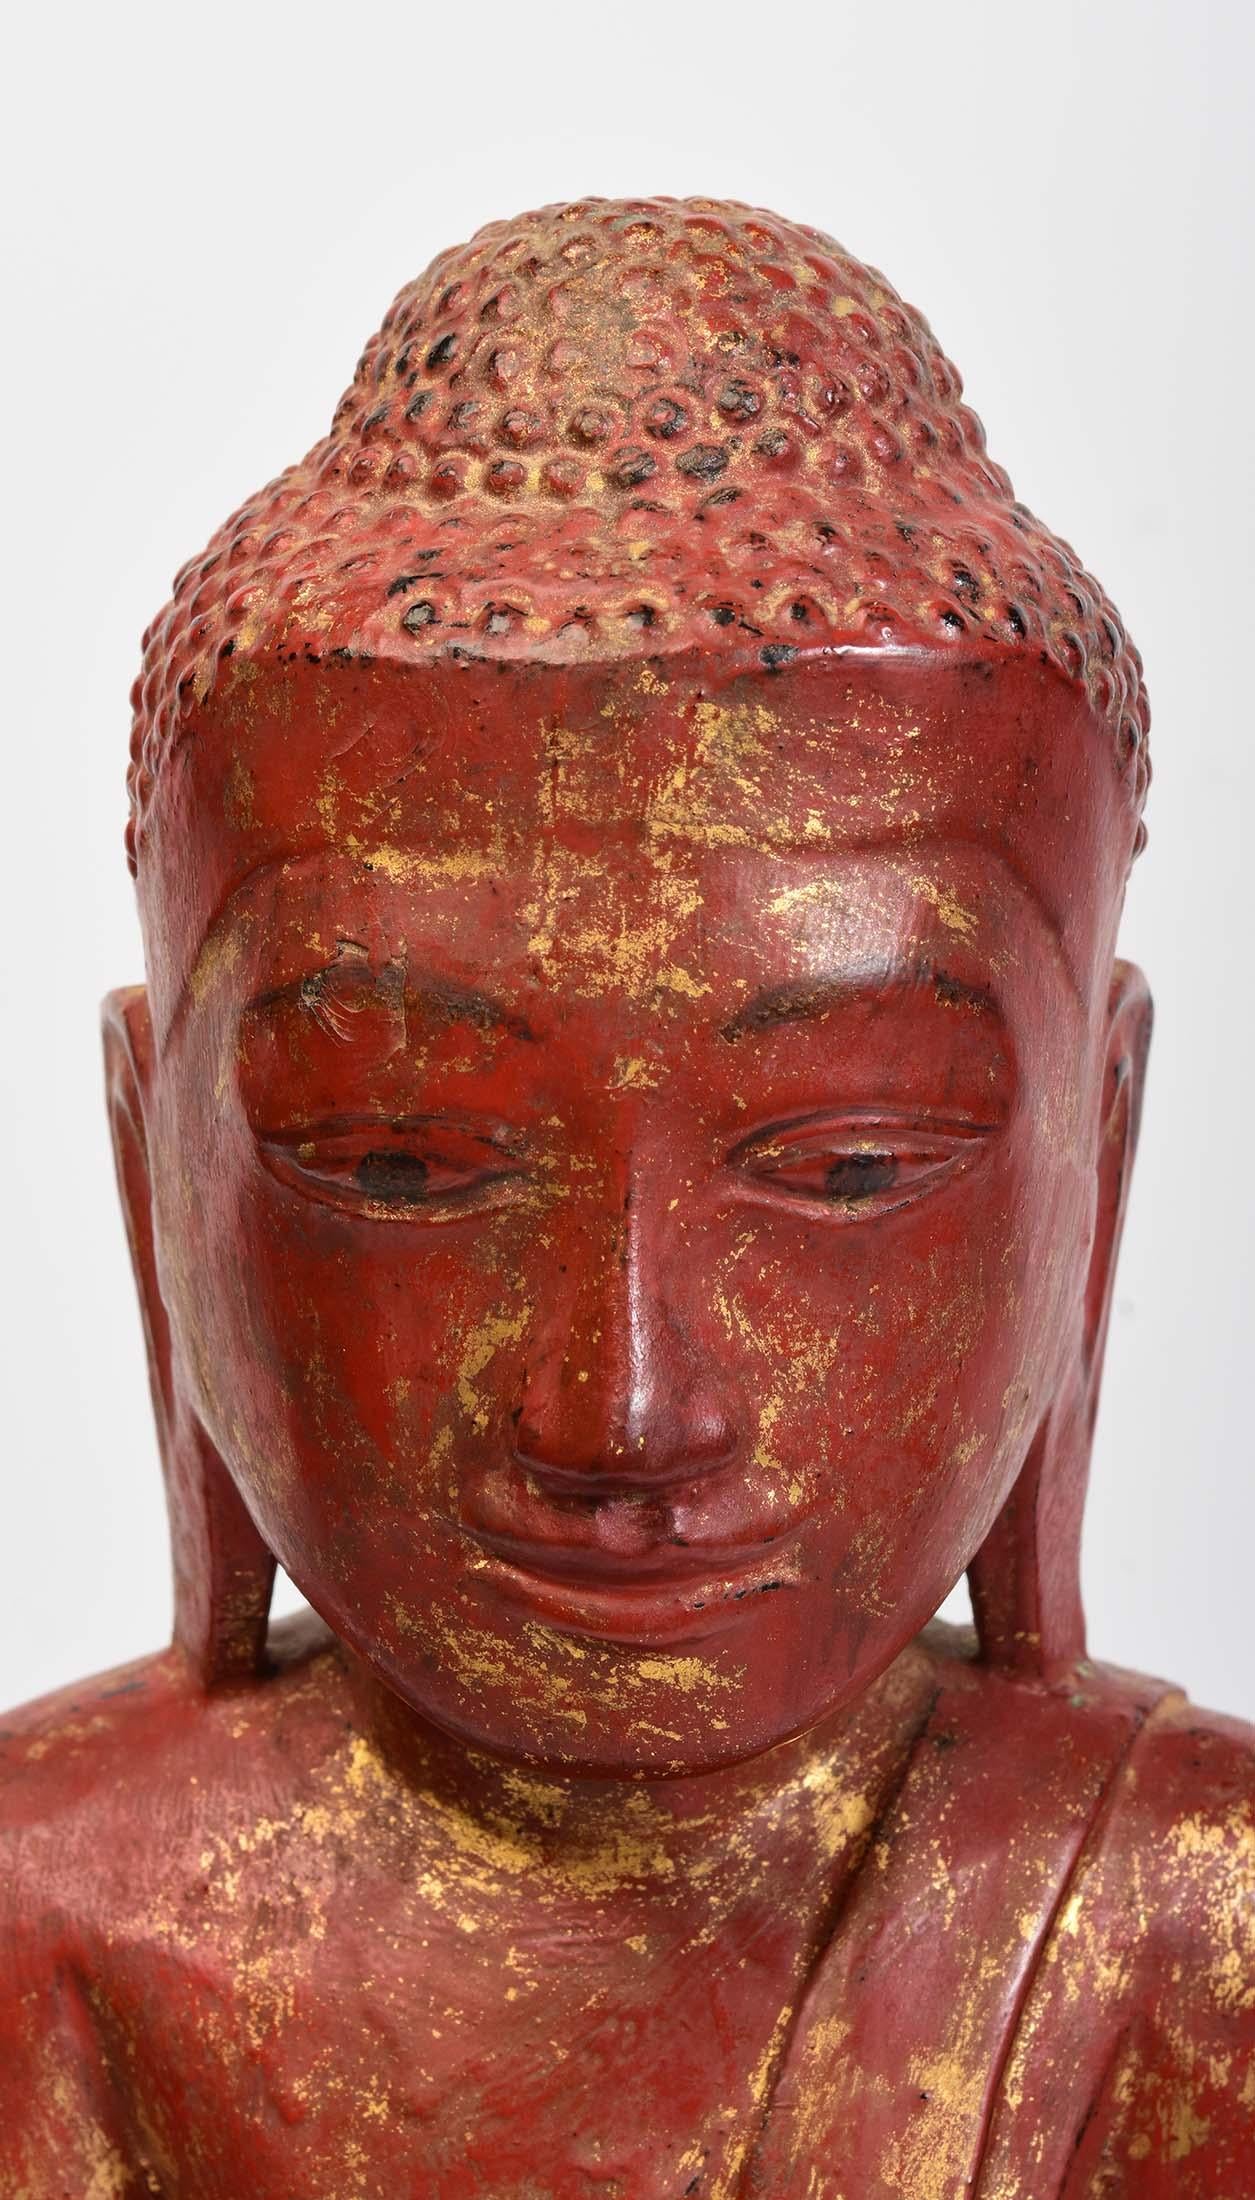 Burmese wooden Buddha sitting in Mara Vijaya (calling the earth to witness) posture on a base.

Age: Burma, Shan Period, 18th Century
Size: Height 45.4 C.M. / Width 15.8 C.M.
Size including stand: Height 47.3 C.M.
Condition: Nice condition overall